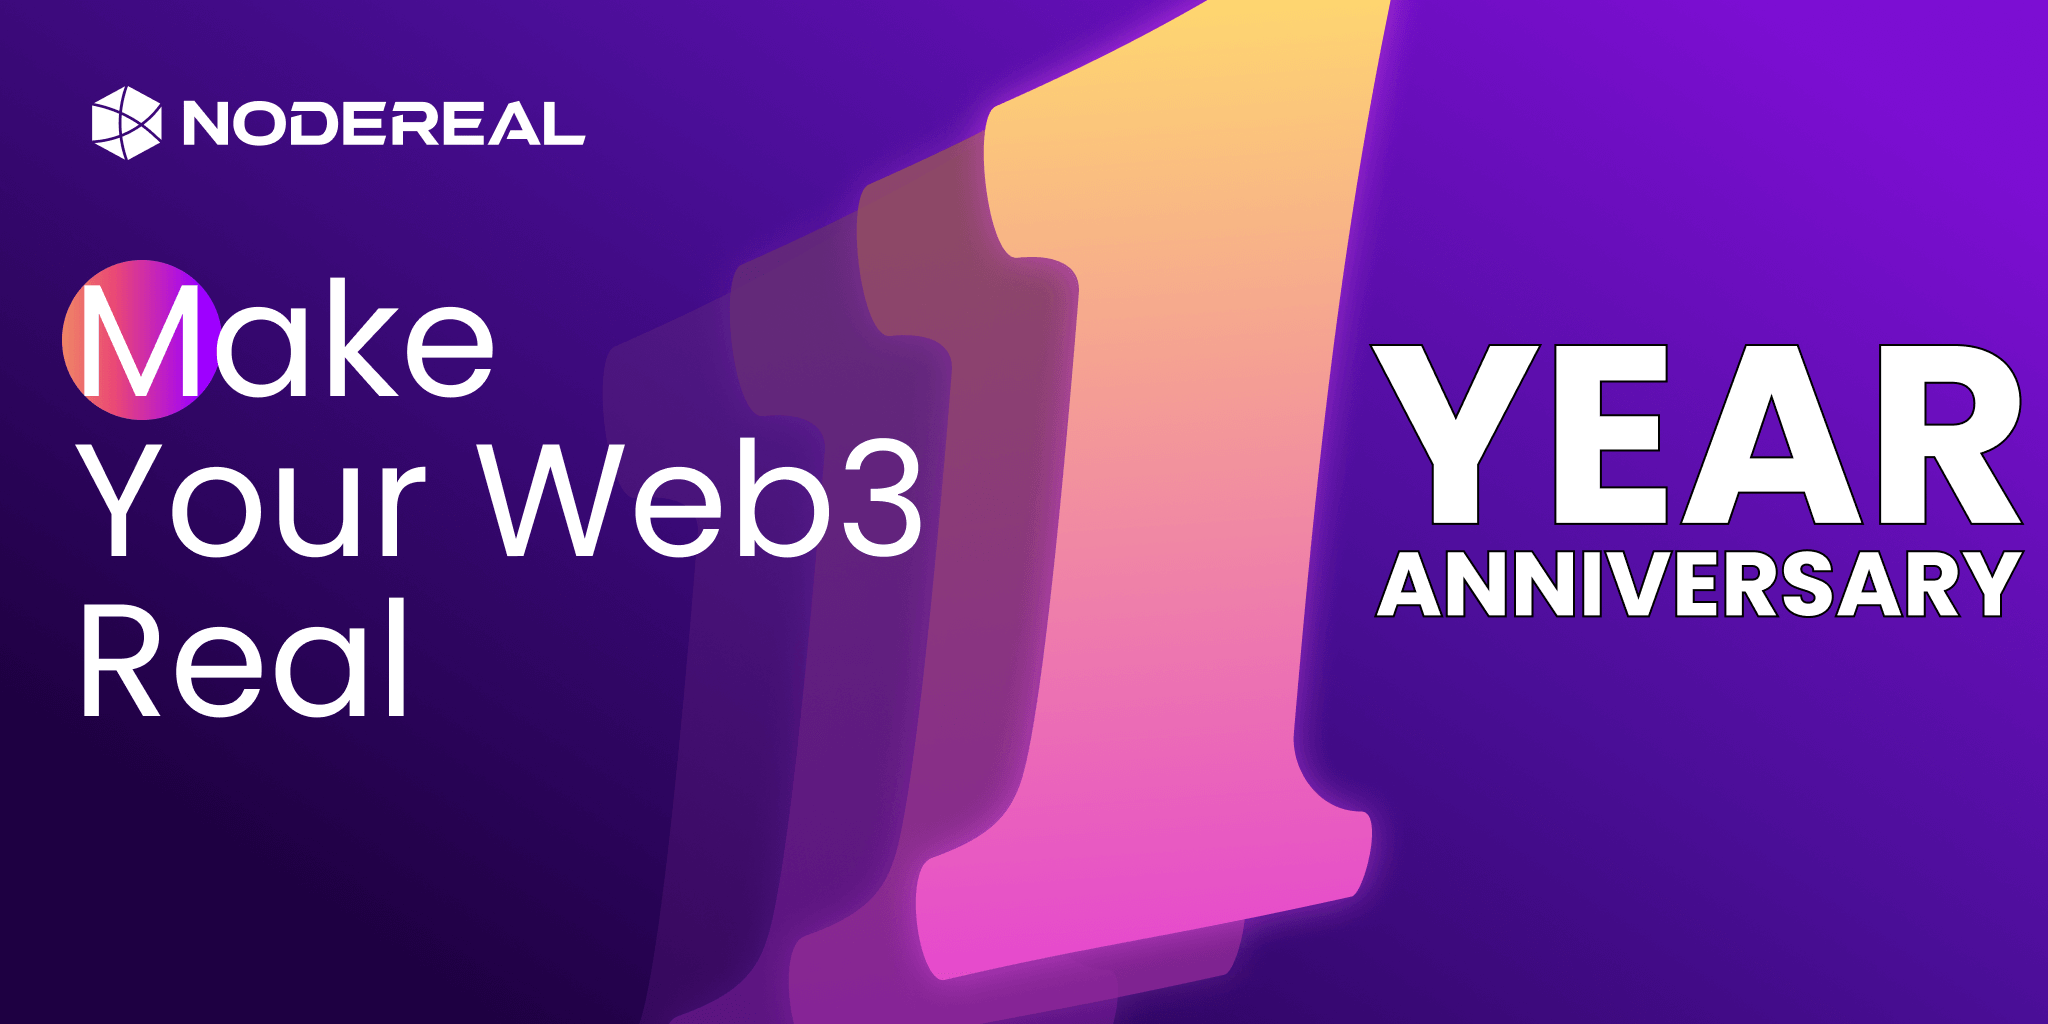 NodeReal Turns 1 Soon! A Groundbreaking Year in Making Web3 Real with Special Promotion